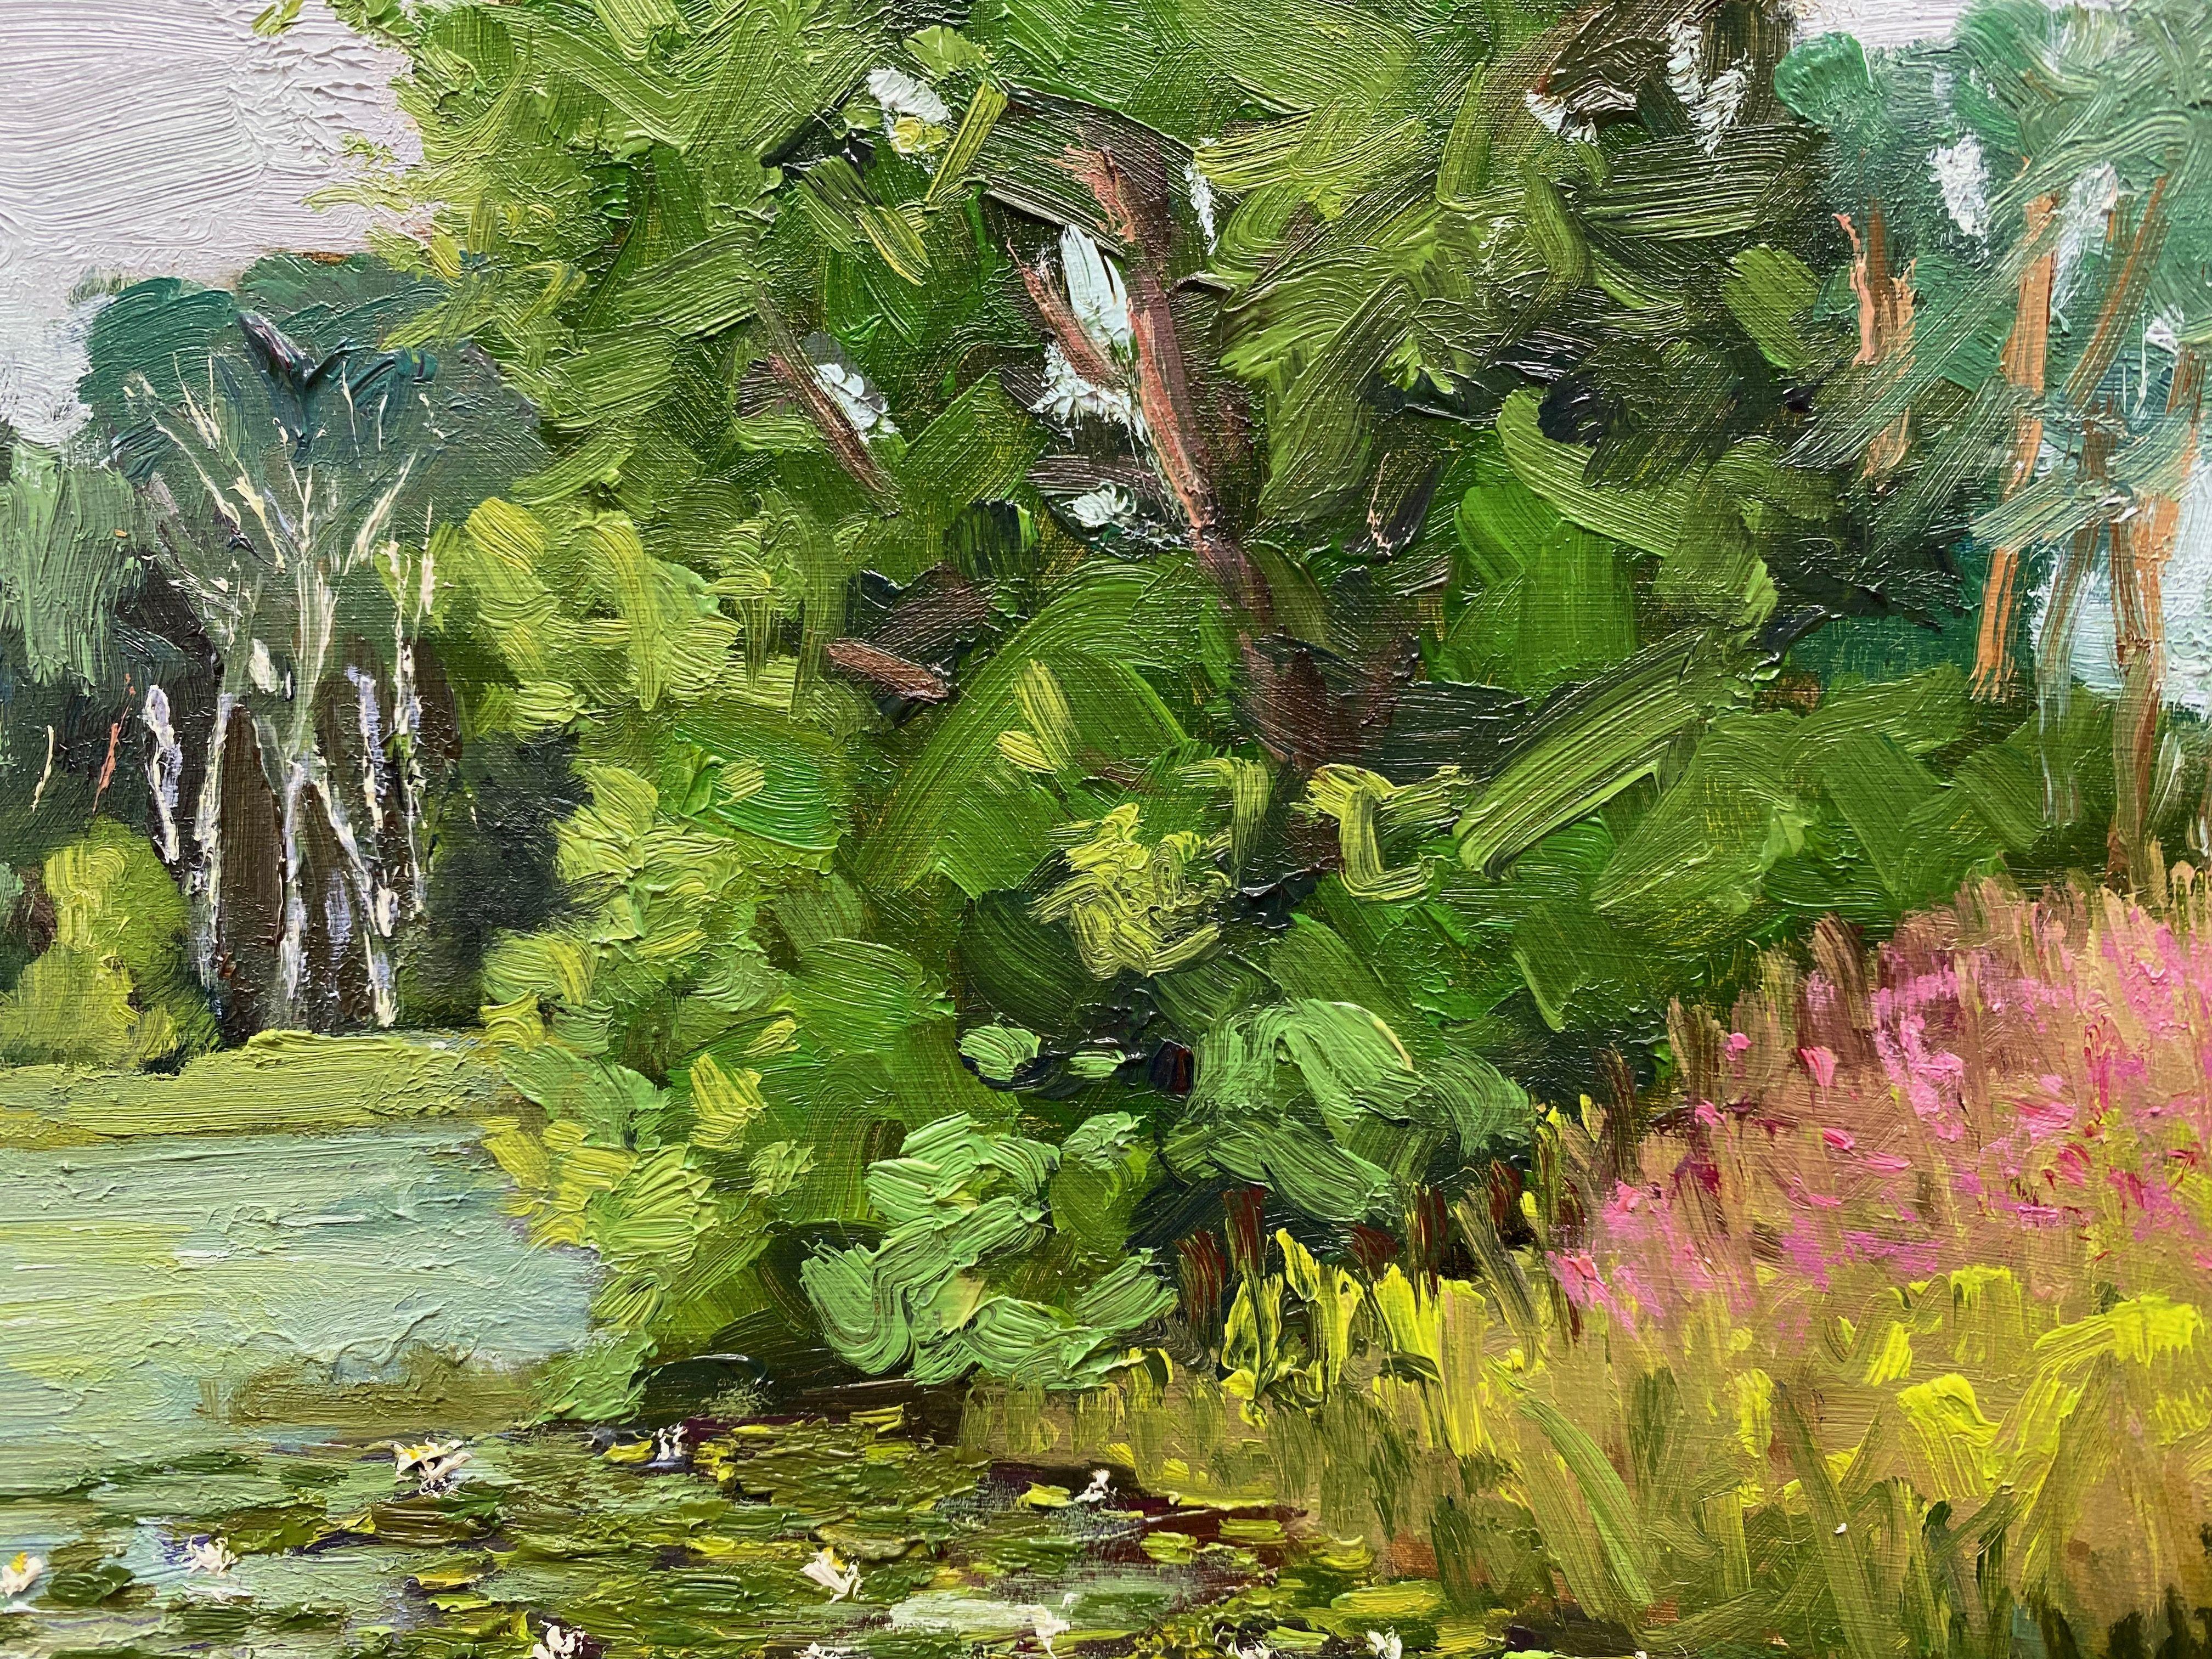 Plein air Painting painted at a small Lake near my home Town in Germany.   The Schnakenpohl an ice age Lake with endemic Fauna und Flora. :: Painting :: Impressionist :: This piece comes with an official certificate of authenticity signed by the